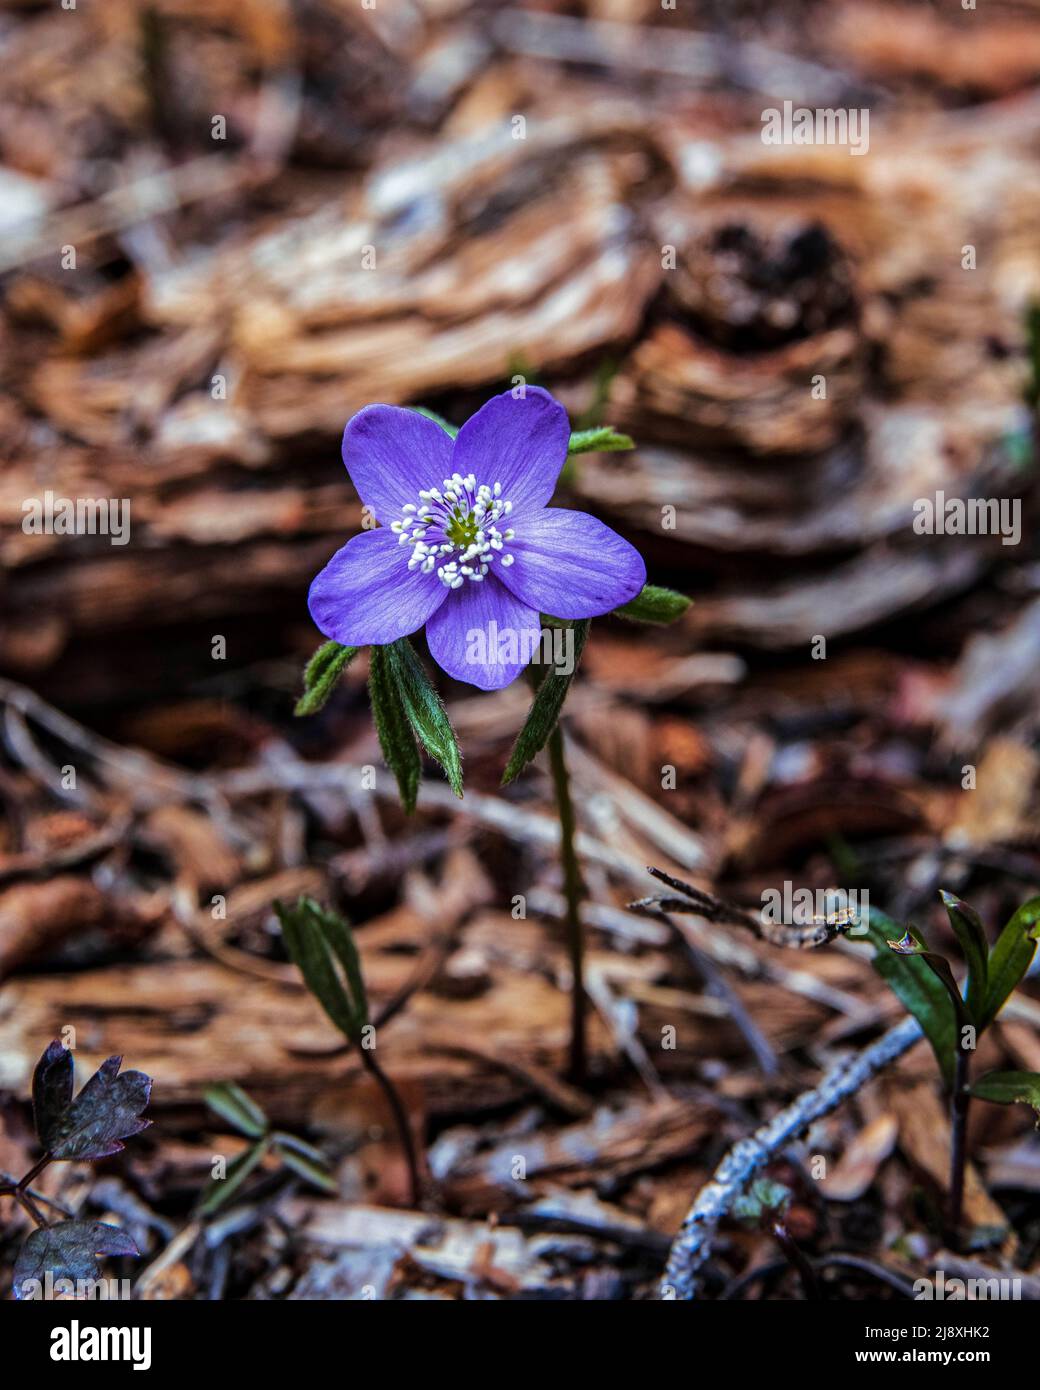 Smalpl purple wild flower on the forest floor in the spring Stock Photo